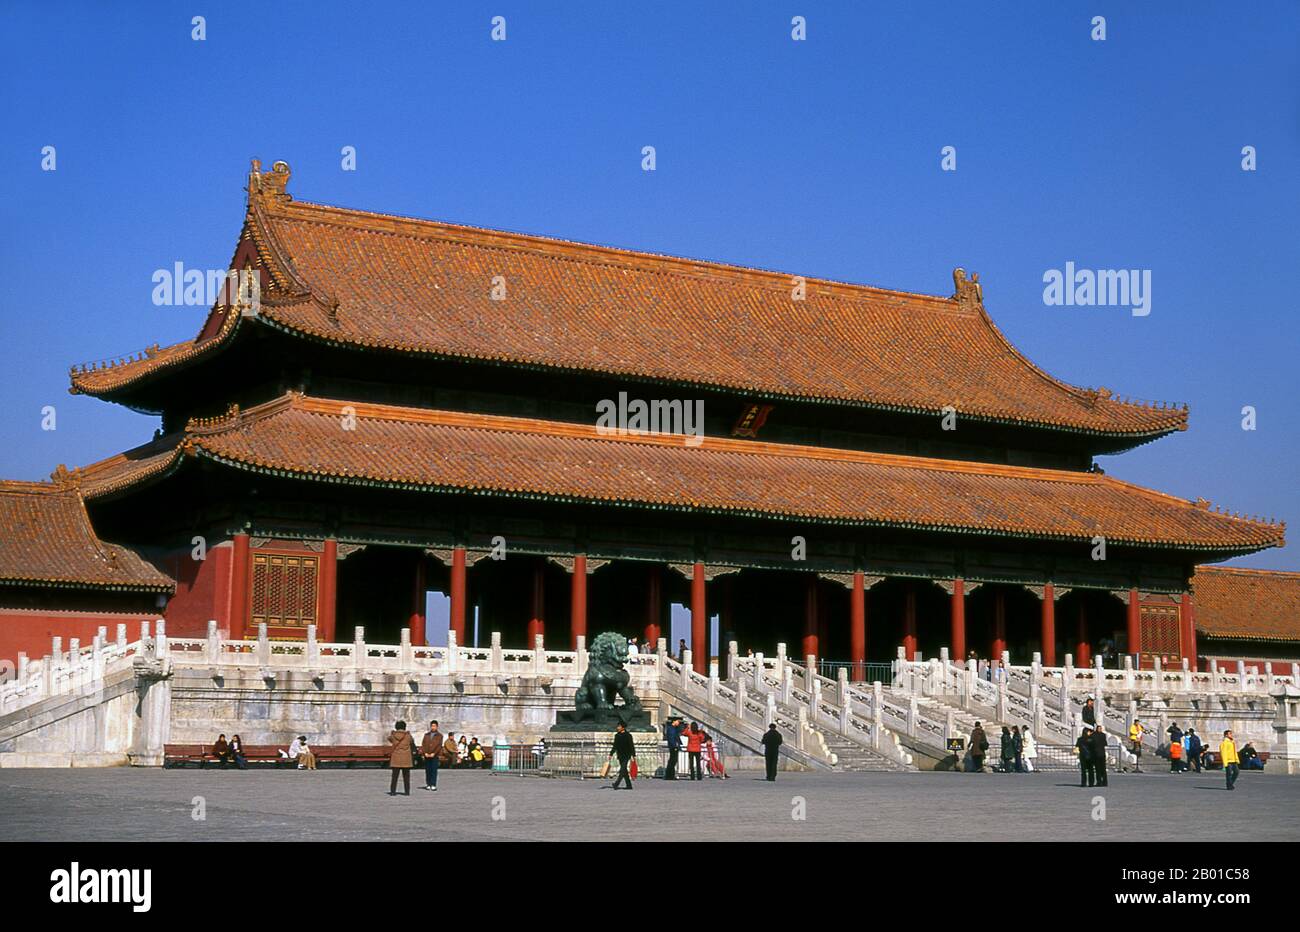 China: Gate of Supreme Harmony, The Forbidden City (Zijin Cheng), Beijing.  The Gate of Supreme Harmony (pinyin: Tàihémén; Manchu: Amba hūwaliyambure duka), is the second major gate at the southern side of the Forbidden City.  The Forbidden City, built between 1406 and 1420, served for 500 years (until the end of the imperial era in 1911) as the seat of all power in China, the throne of the Son of Heaven and the private residence of all the Ming and Qing dynasty emperors. The complex consists of 980 buildings with 8,707 bays of rooms and covers 720,000 sq m (7,800,000 sq ft). Stock Photo